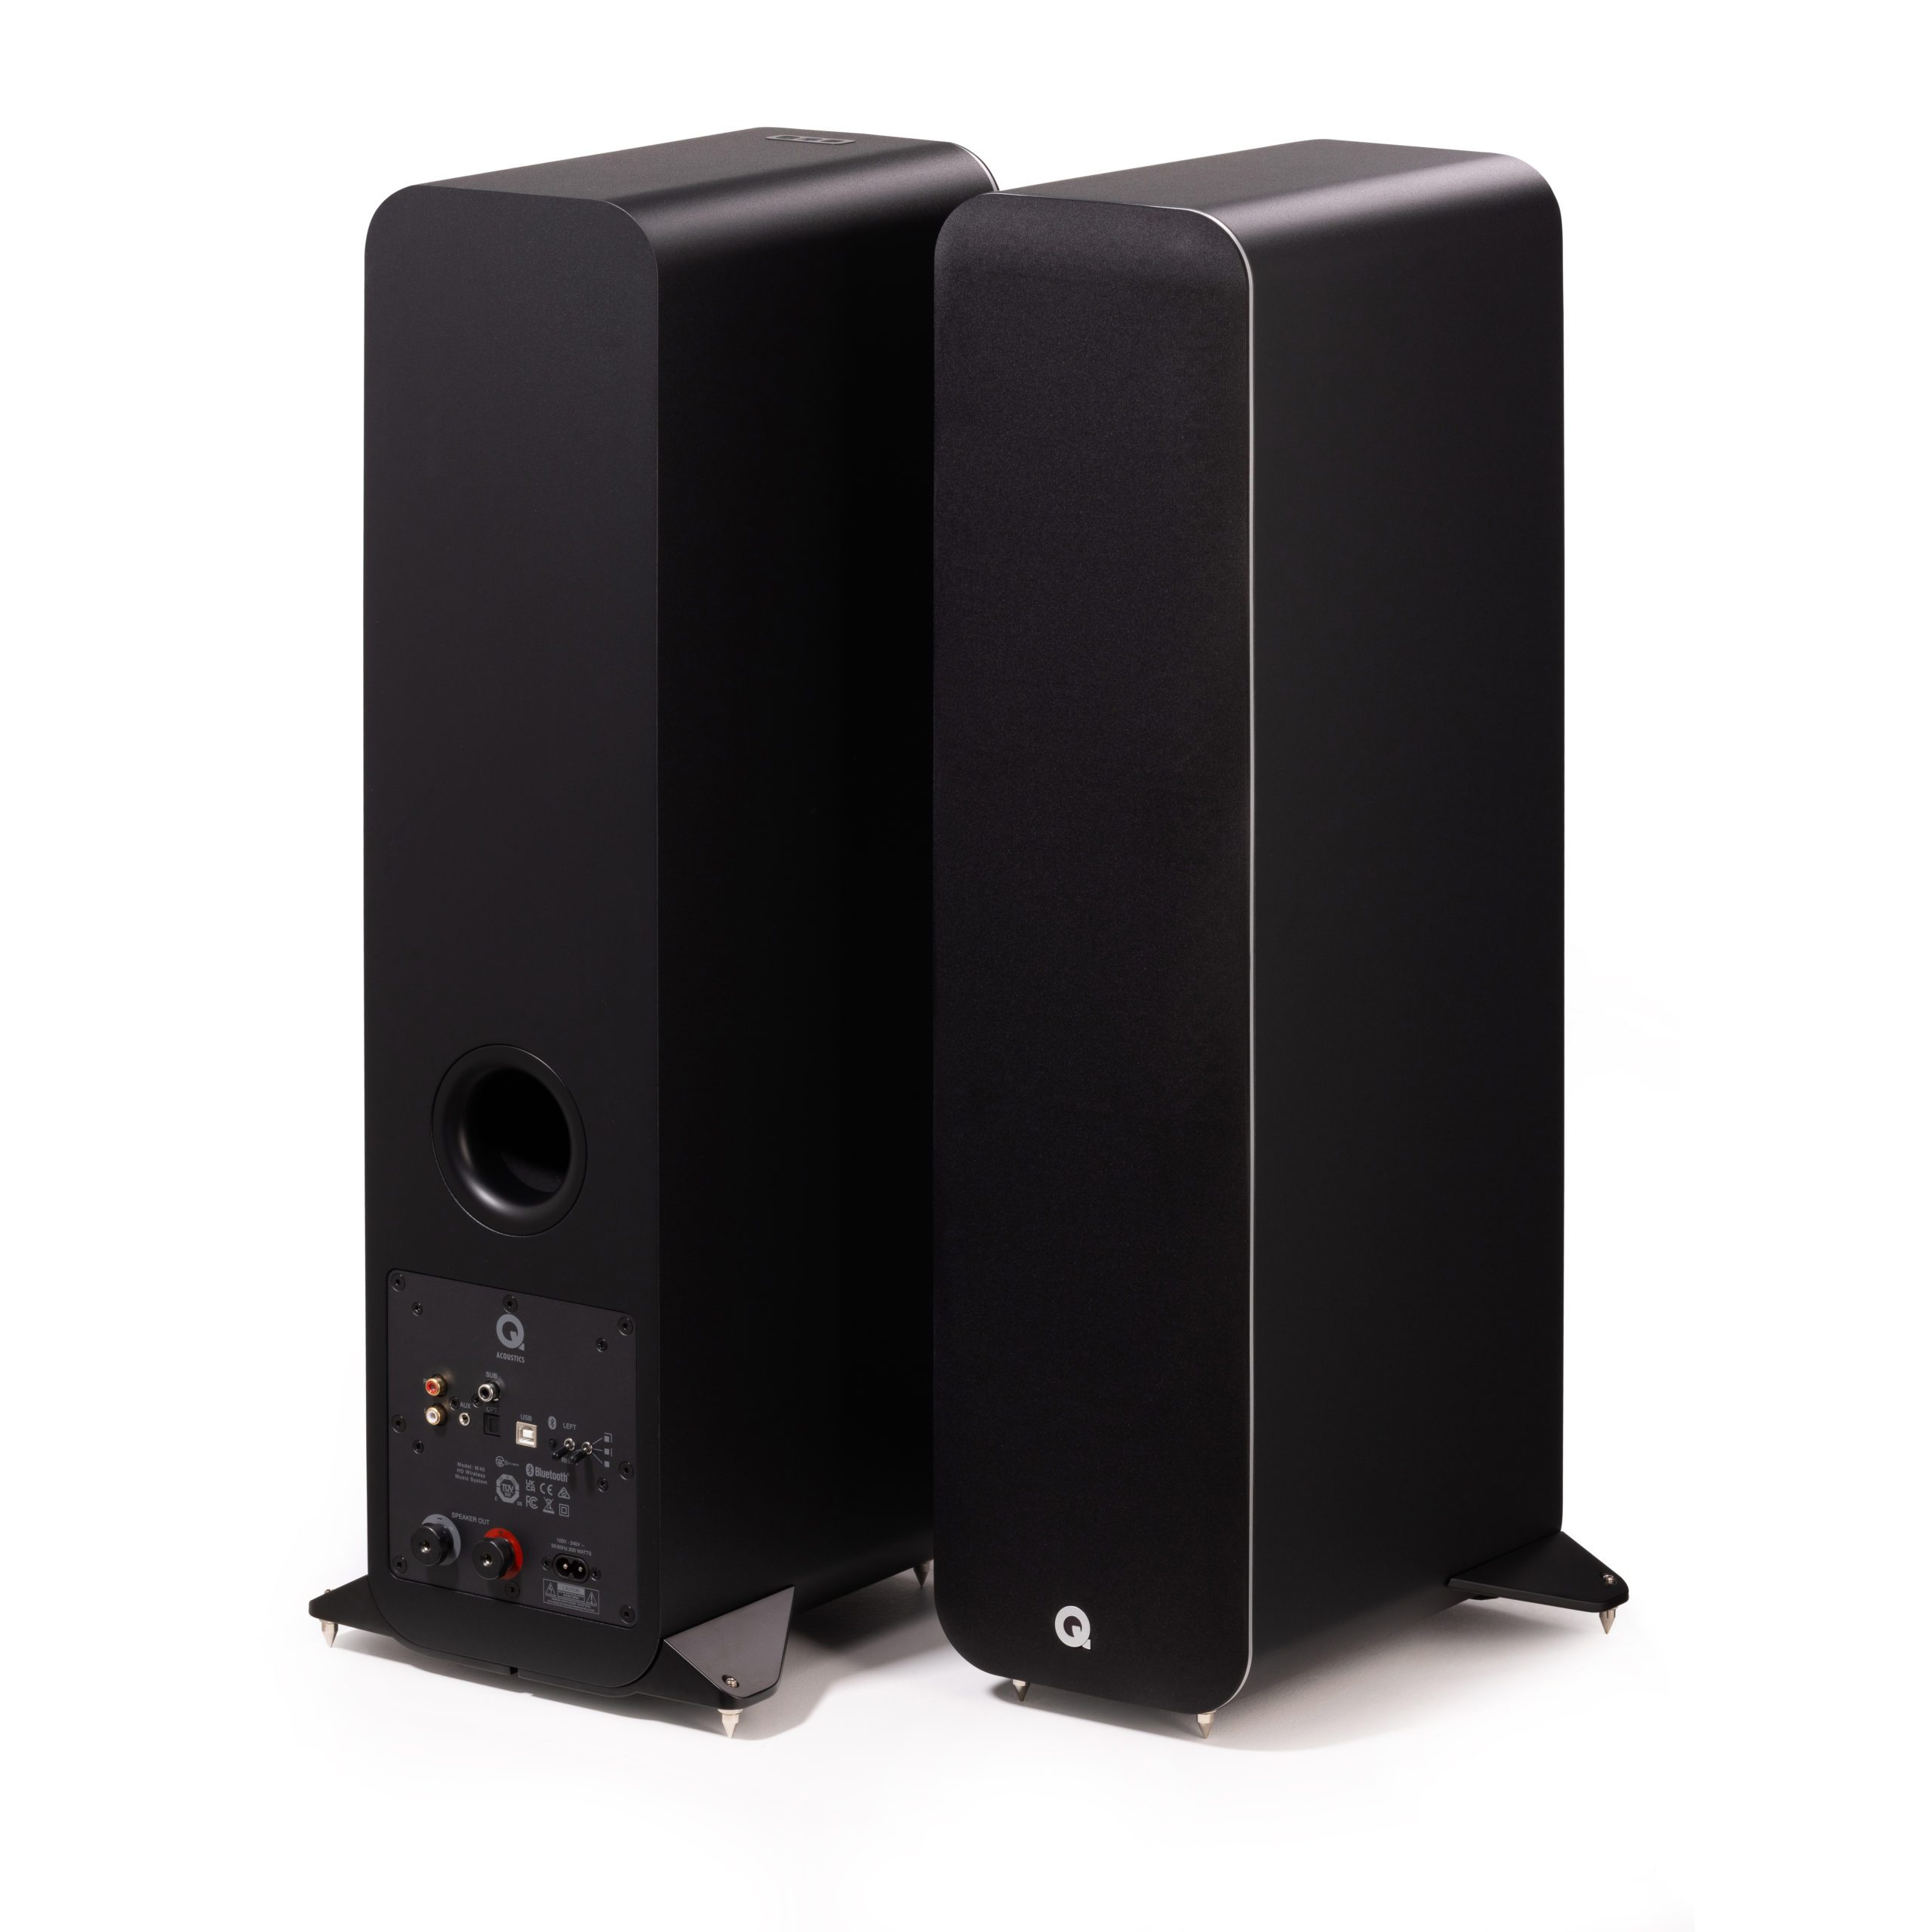 M40 Micro Tower, Wireless music system